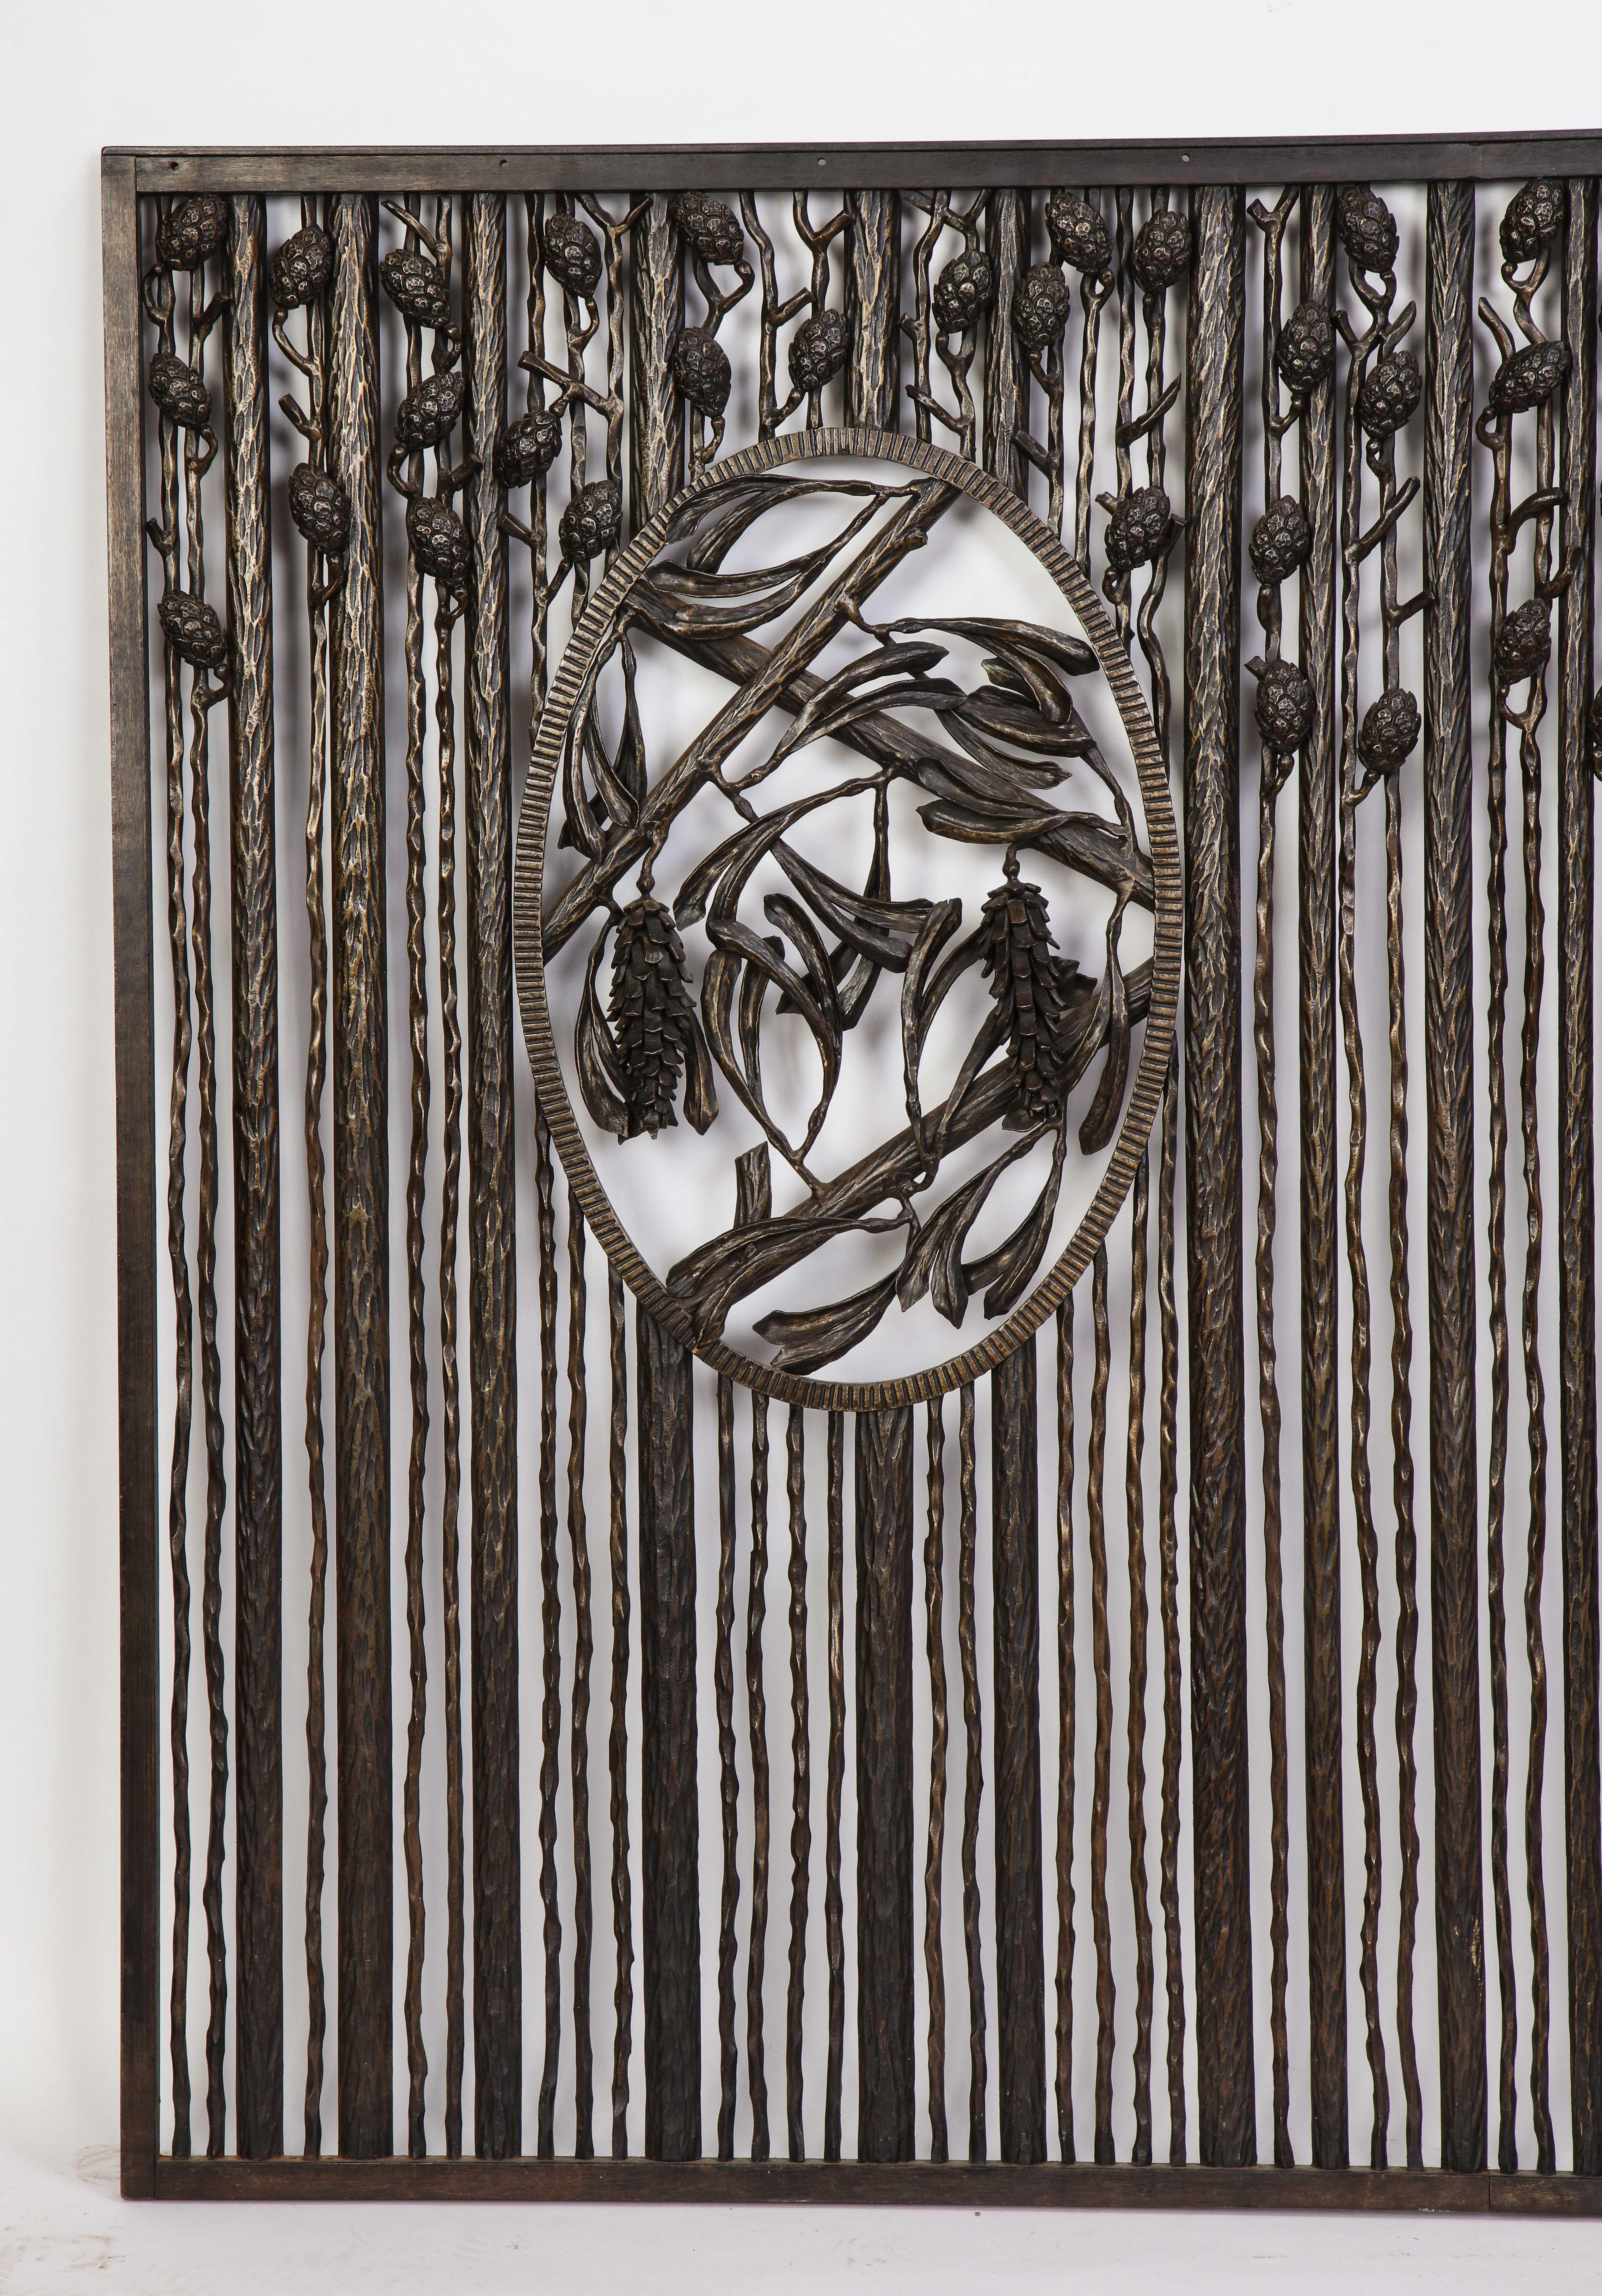 A modern, art deco, wrought-iron grate in the style of Edgar Brandt. Modeled as branches suspending pine cones, this piece pairs well with Black Forest design. When paired with bright flowers, the piece causes a juxtaposition and conversation